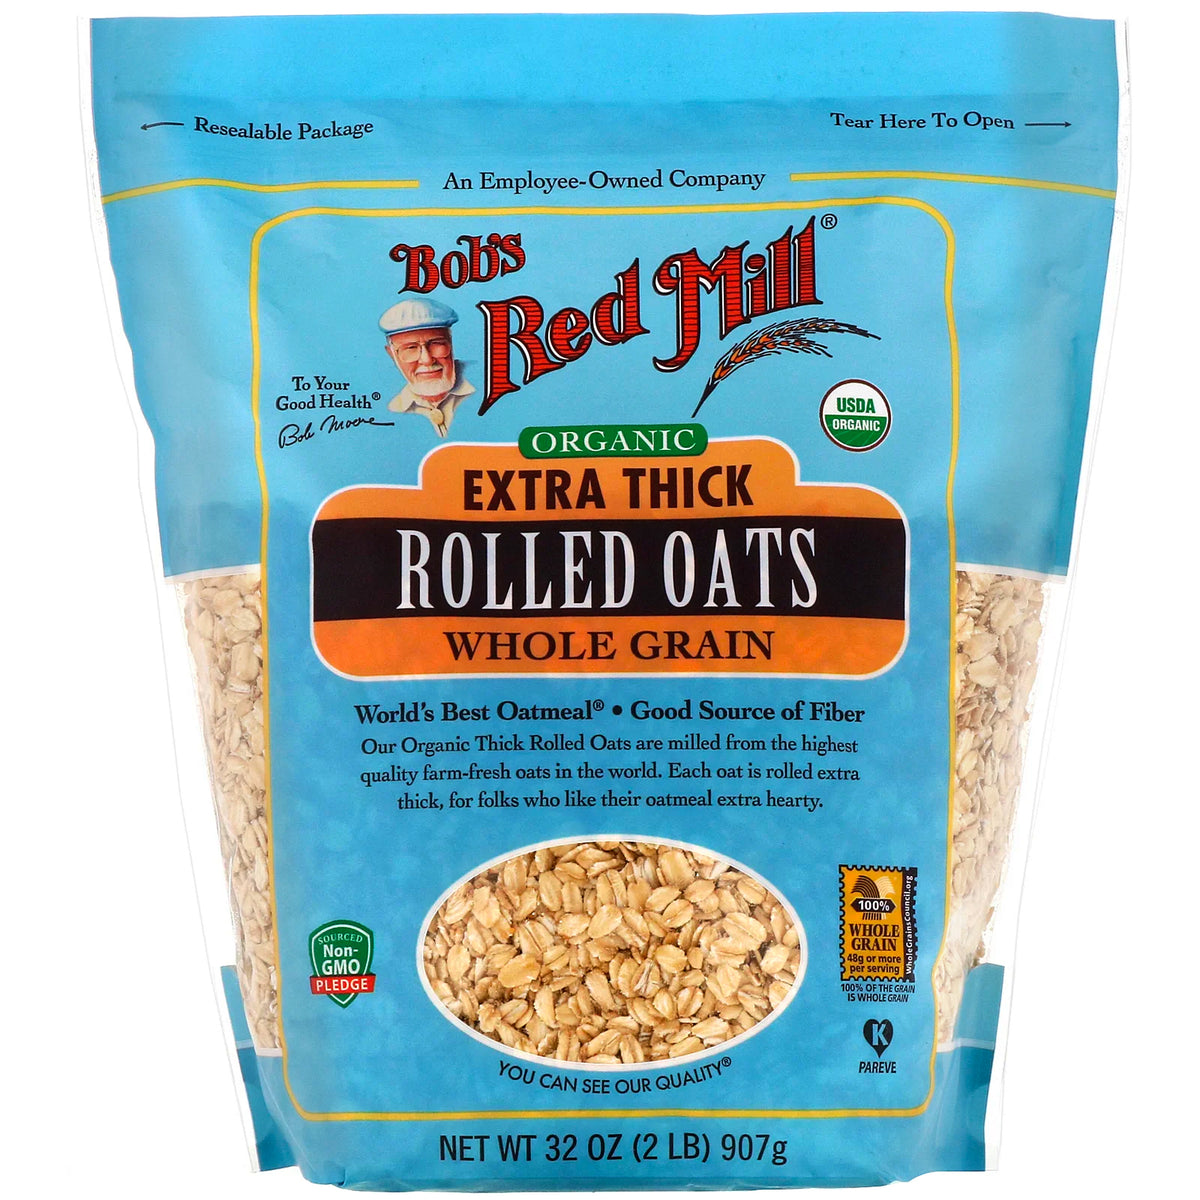 Old Fashioned Rolled Oats, Whole Grain, 32 oz (907 g)